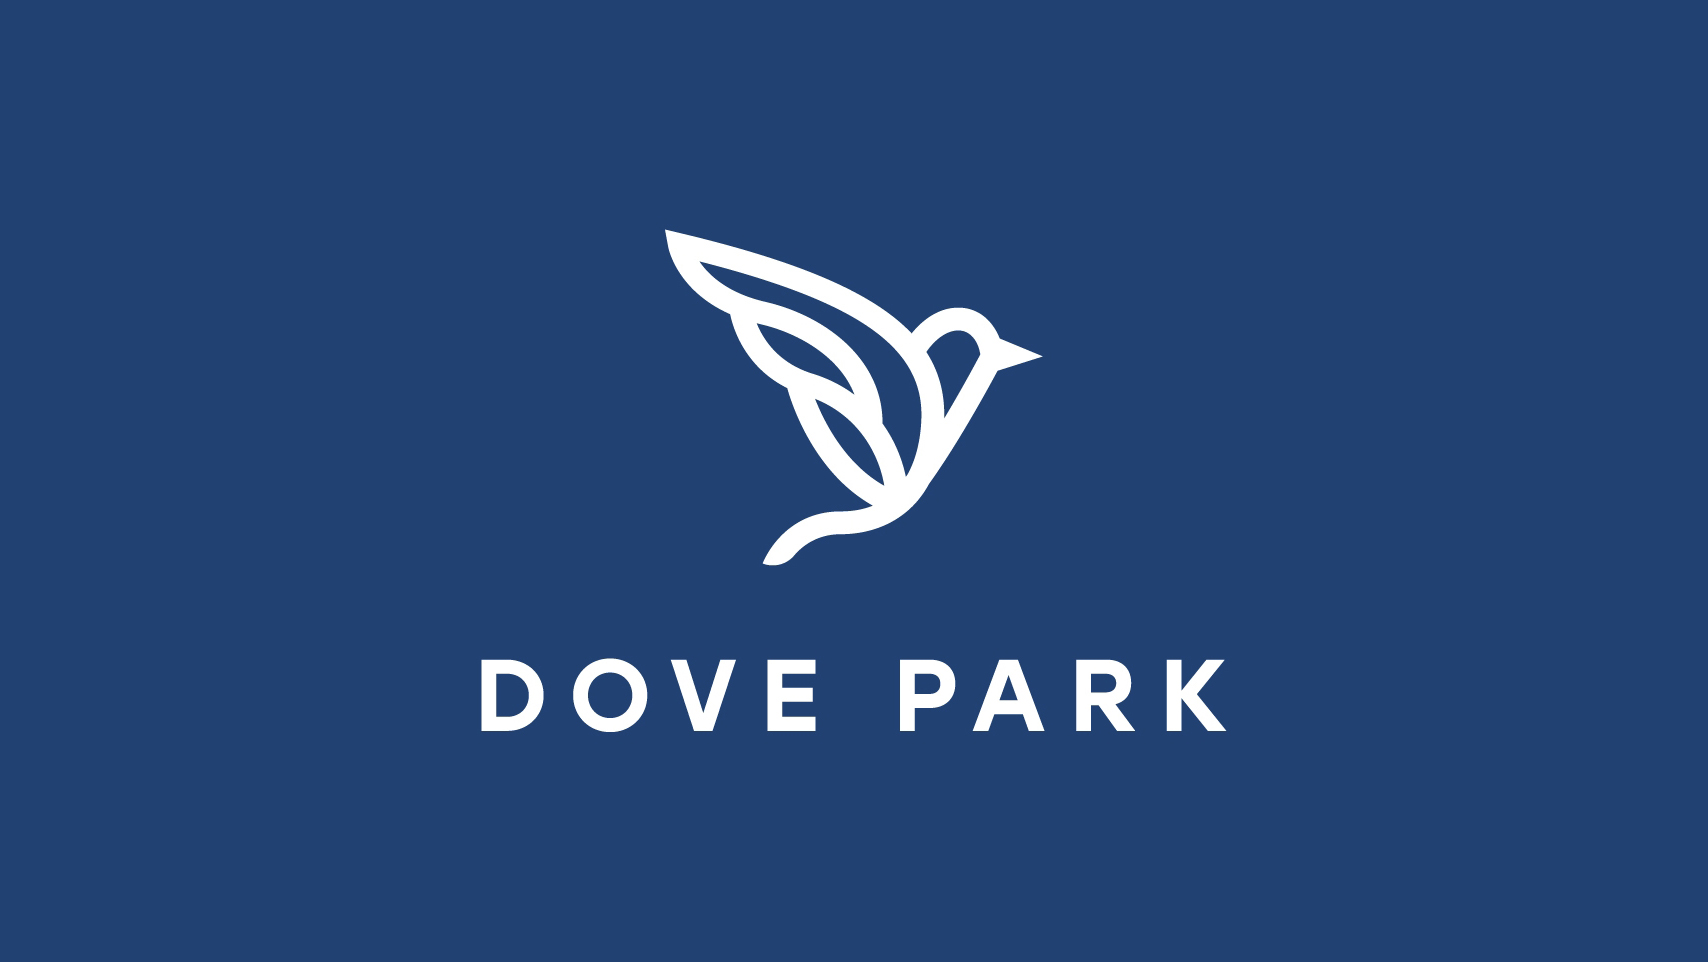 Dovepark Properties - Comer Homes introduces a dedicated division for affordable homes 